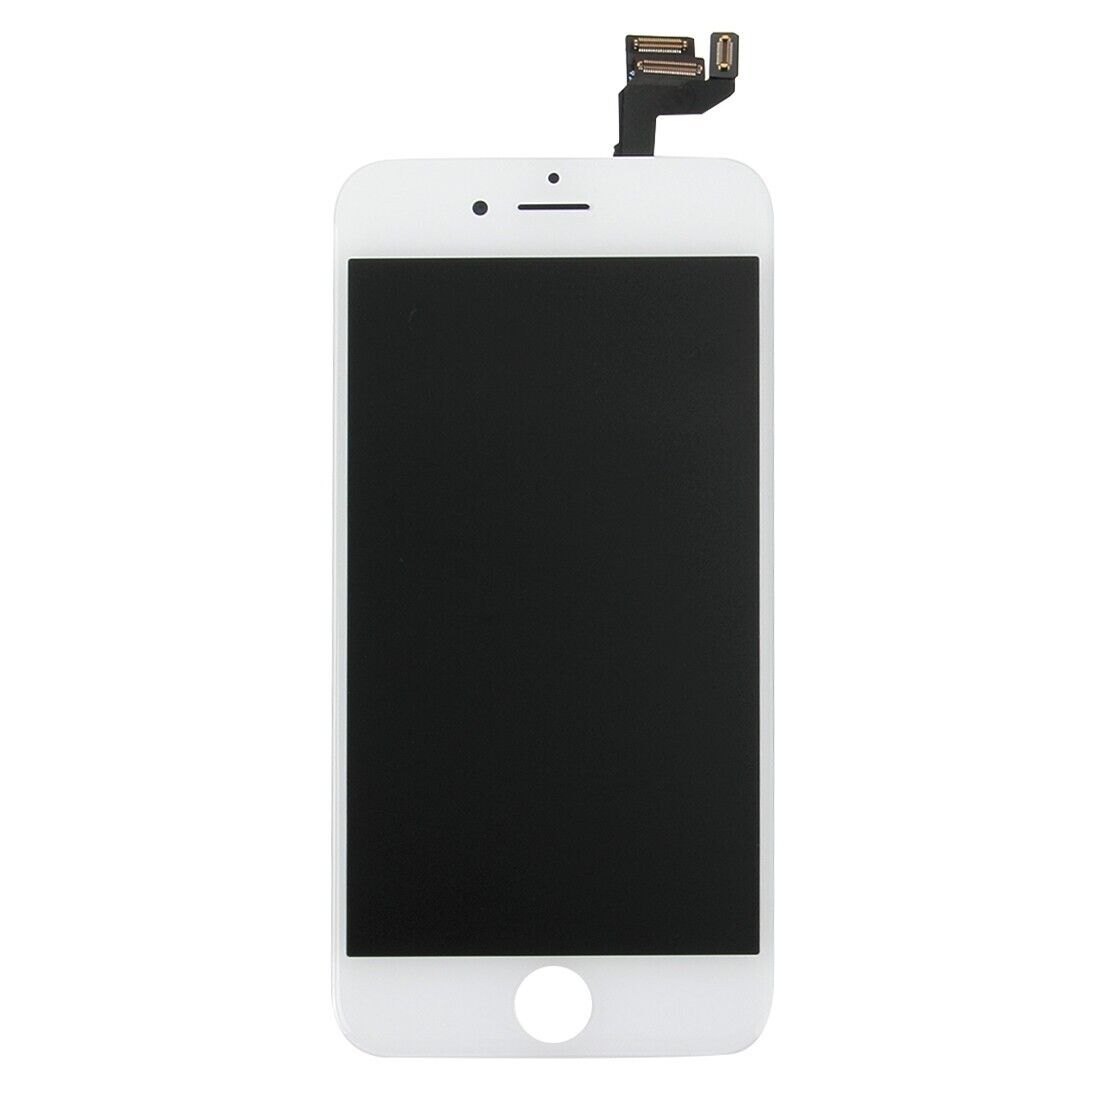 Digitizer Assembly (Front Camera + Original LCD + Frame + Touch Panel) for iPhone 6s(White)